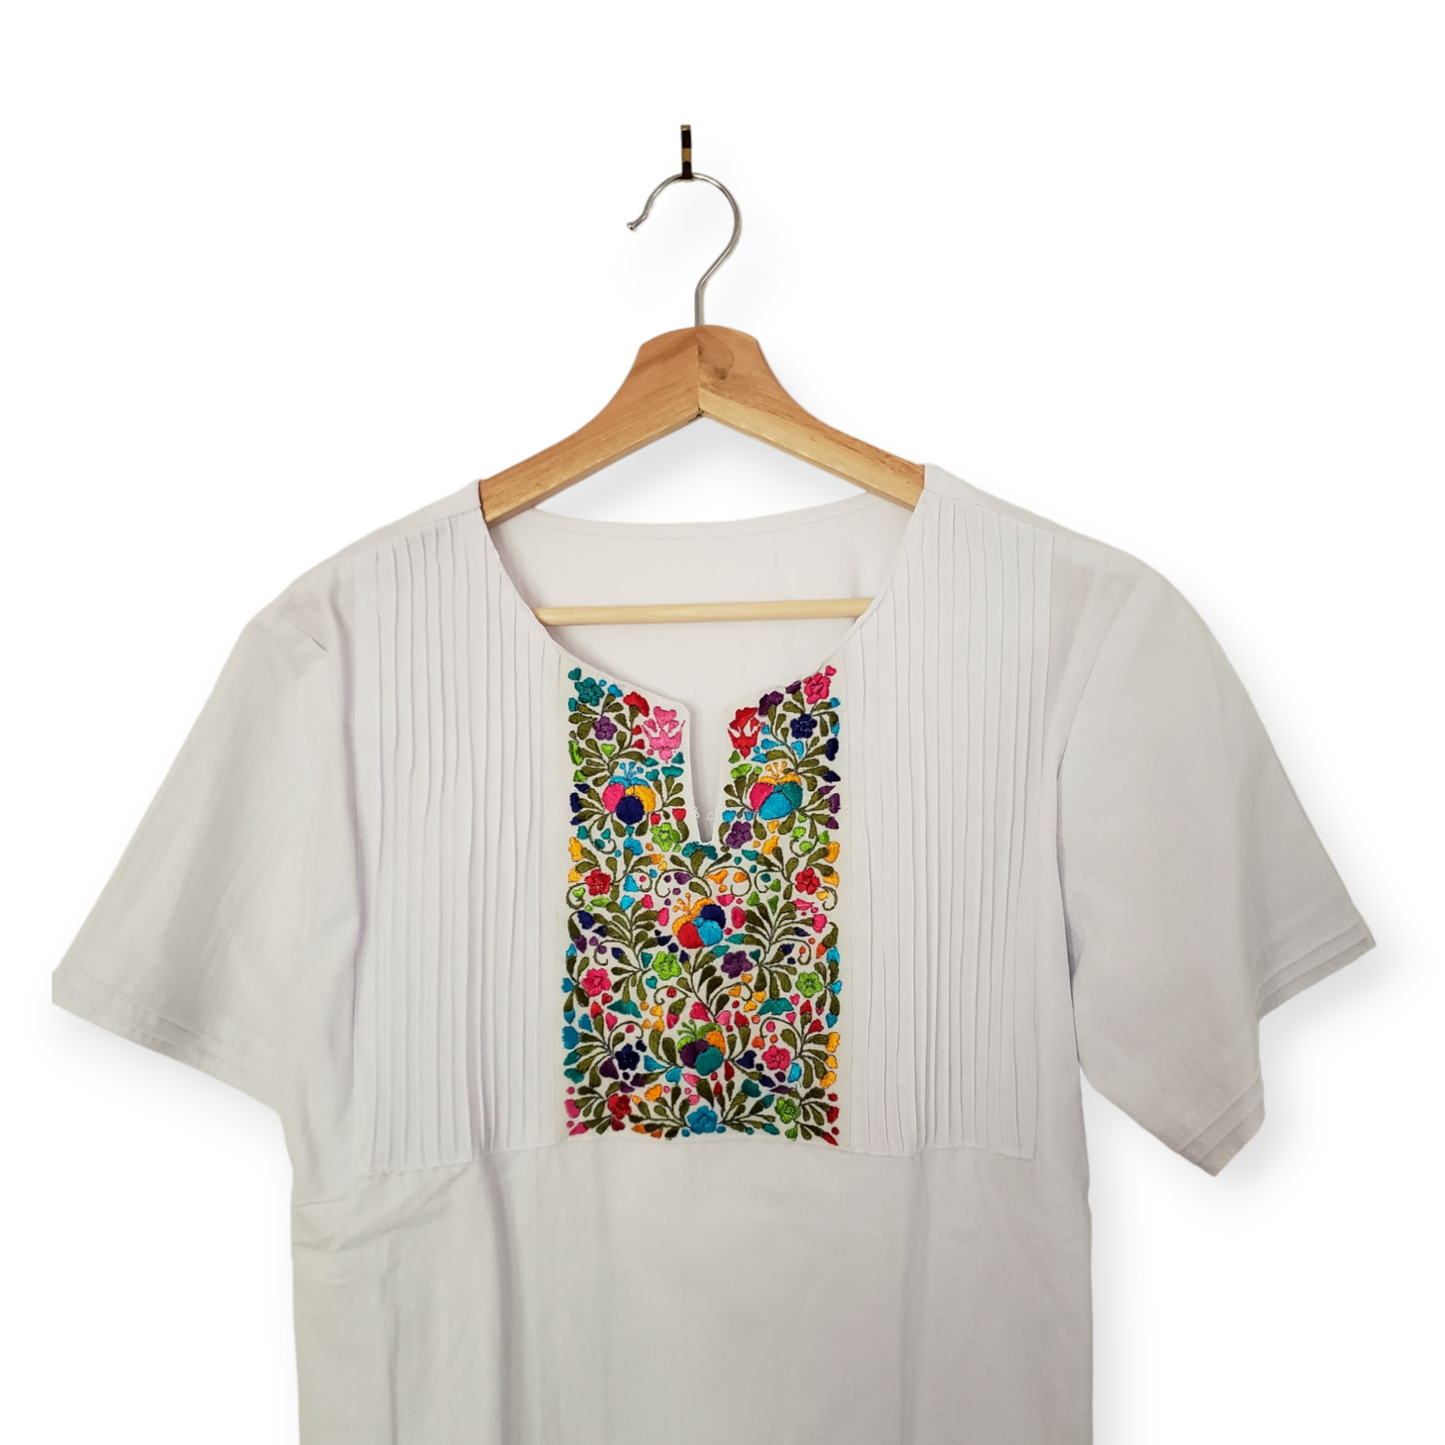 Traditional Mexican Embroidered Pleated Shirt Floral Top Blouse Handmade Oaxaca Floral